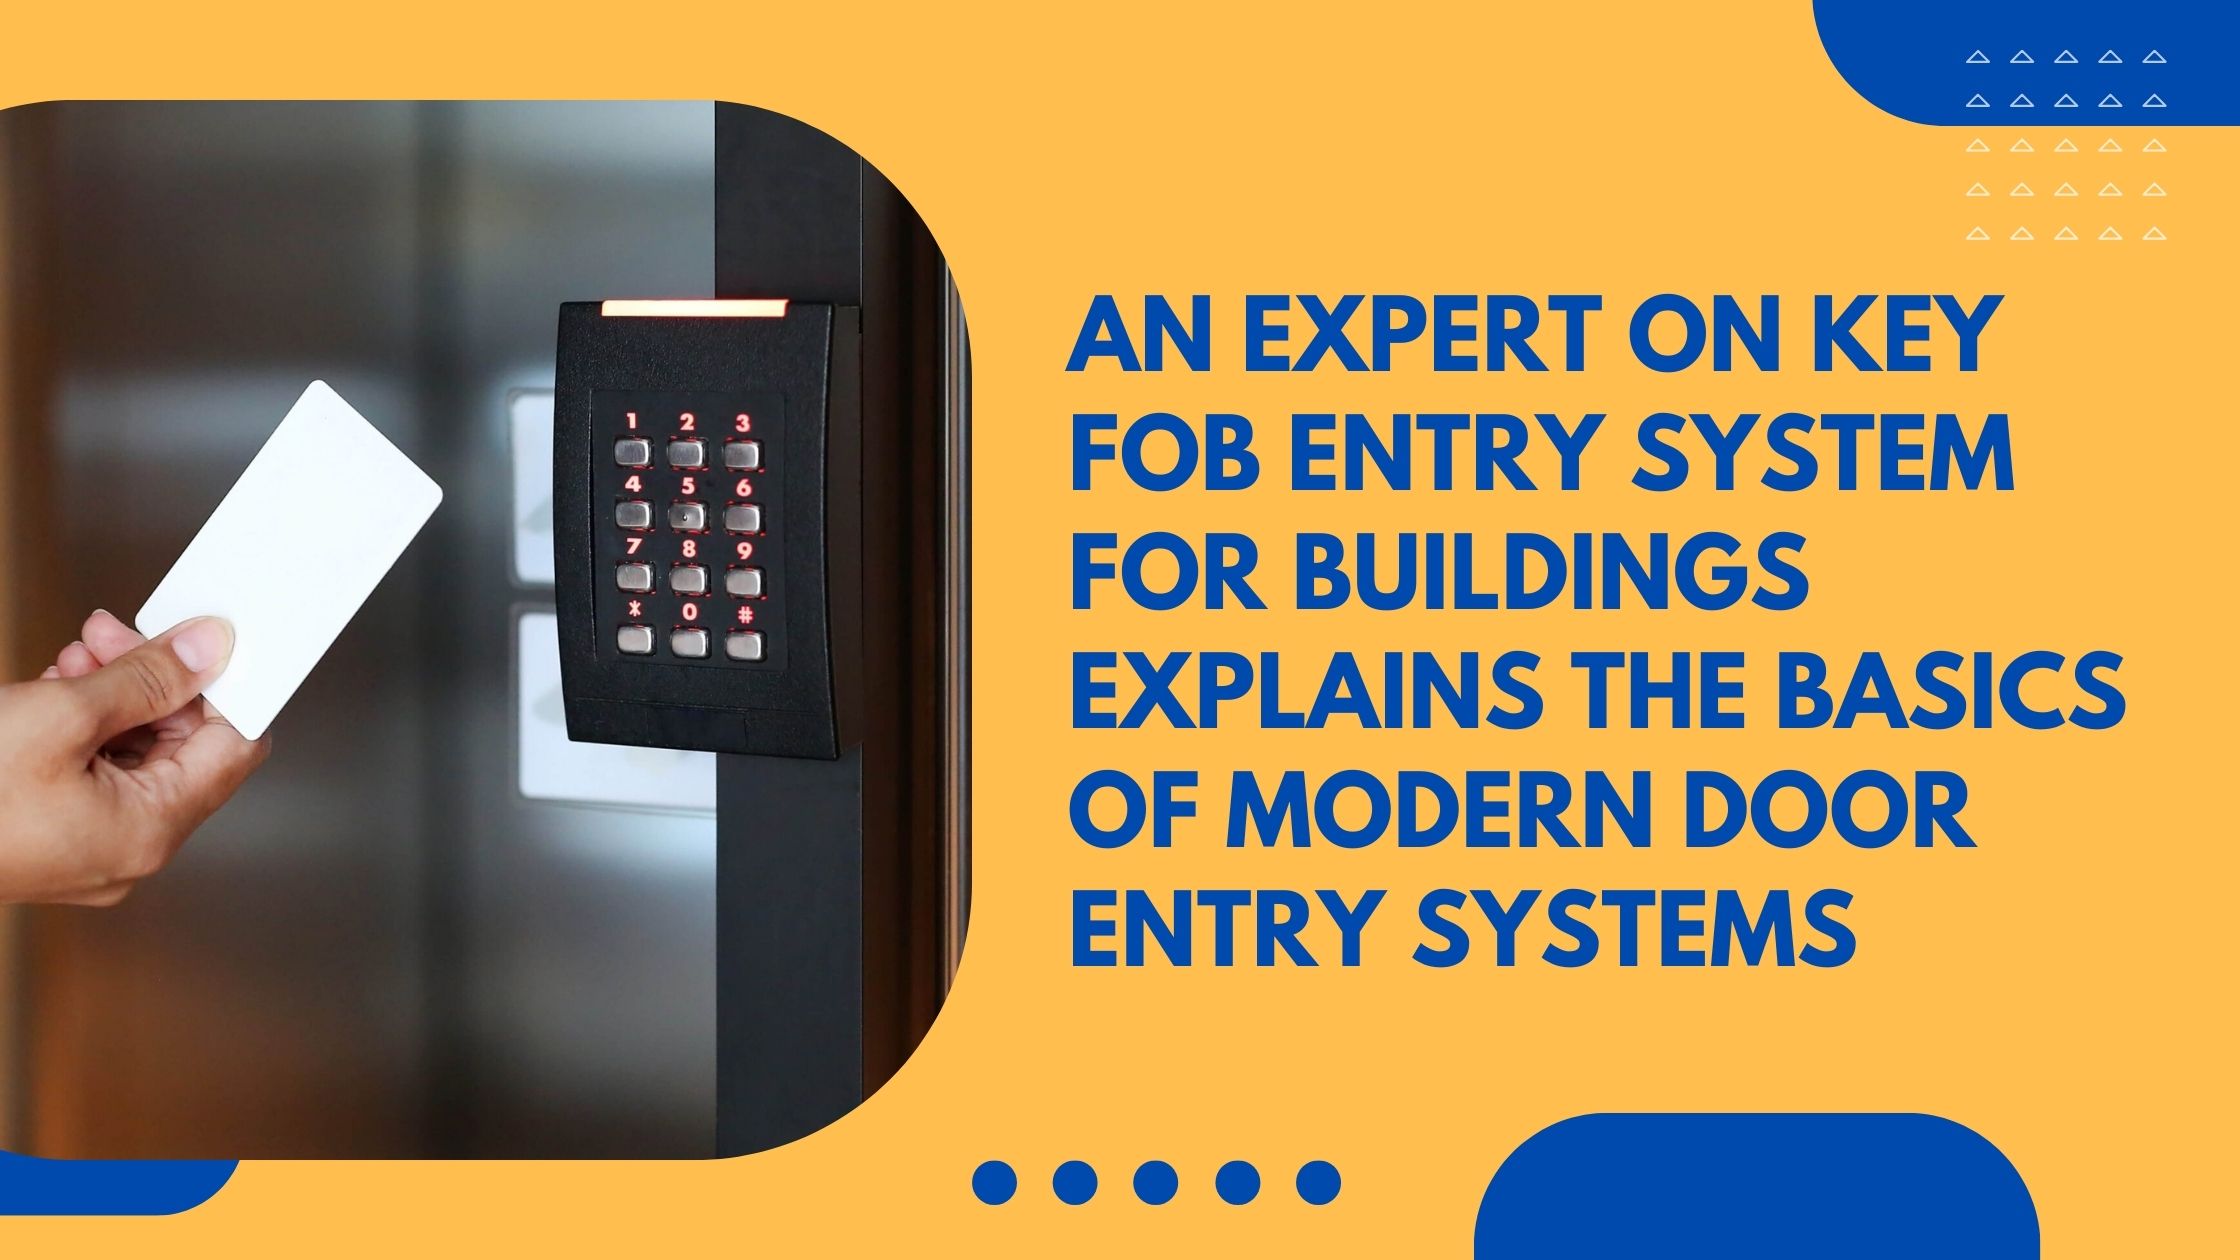 An expert on key fob entry system for buildings explains the basics of modern door entry systems